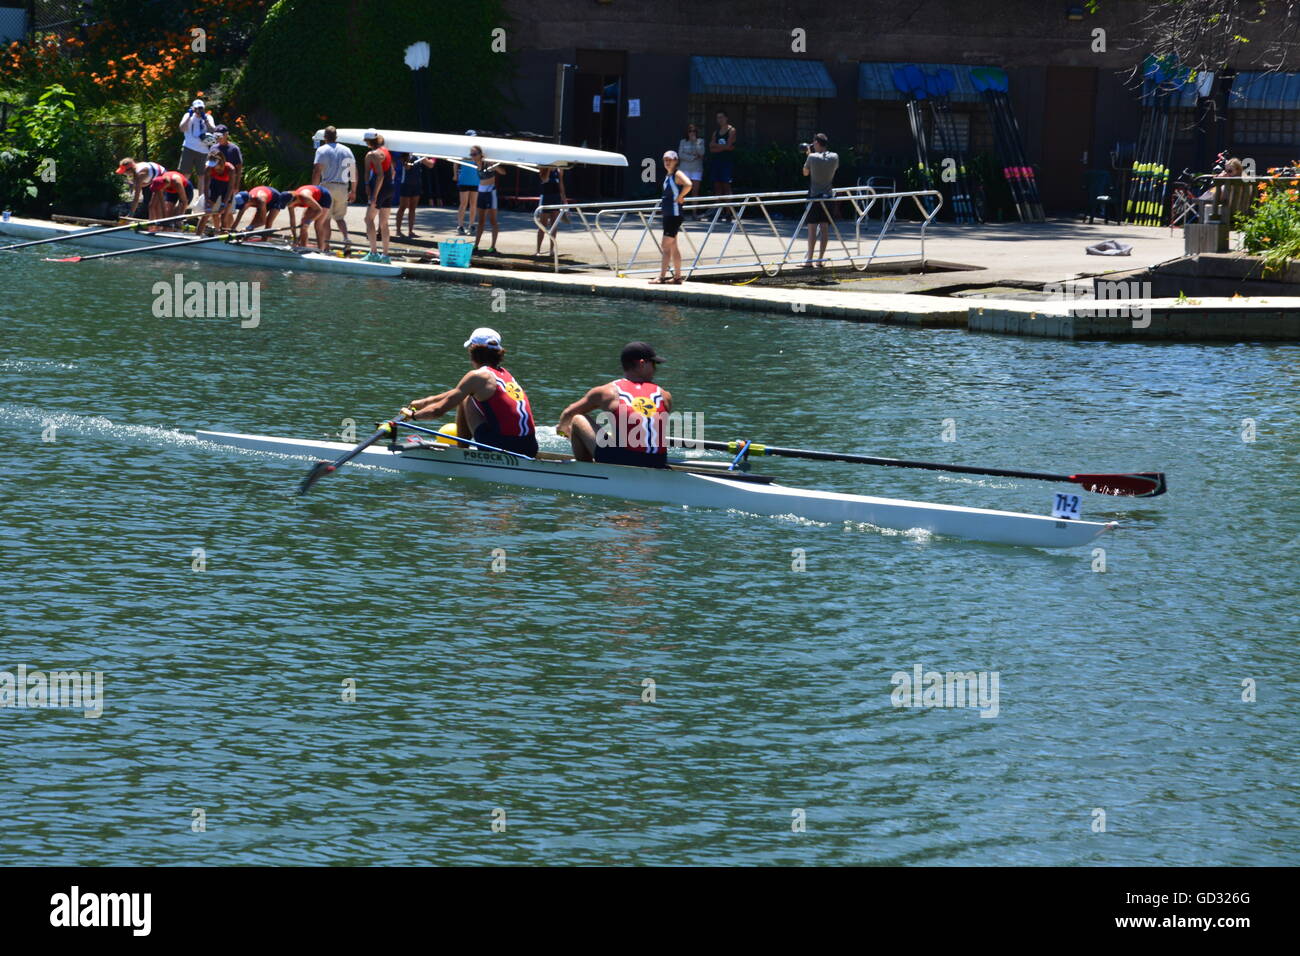 A St Louis crew races down the Lincoln Park Lagoon at the 36th annual running of the Chicago Sprints Regatta, July 9-10, 2016 Stock Photo